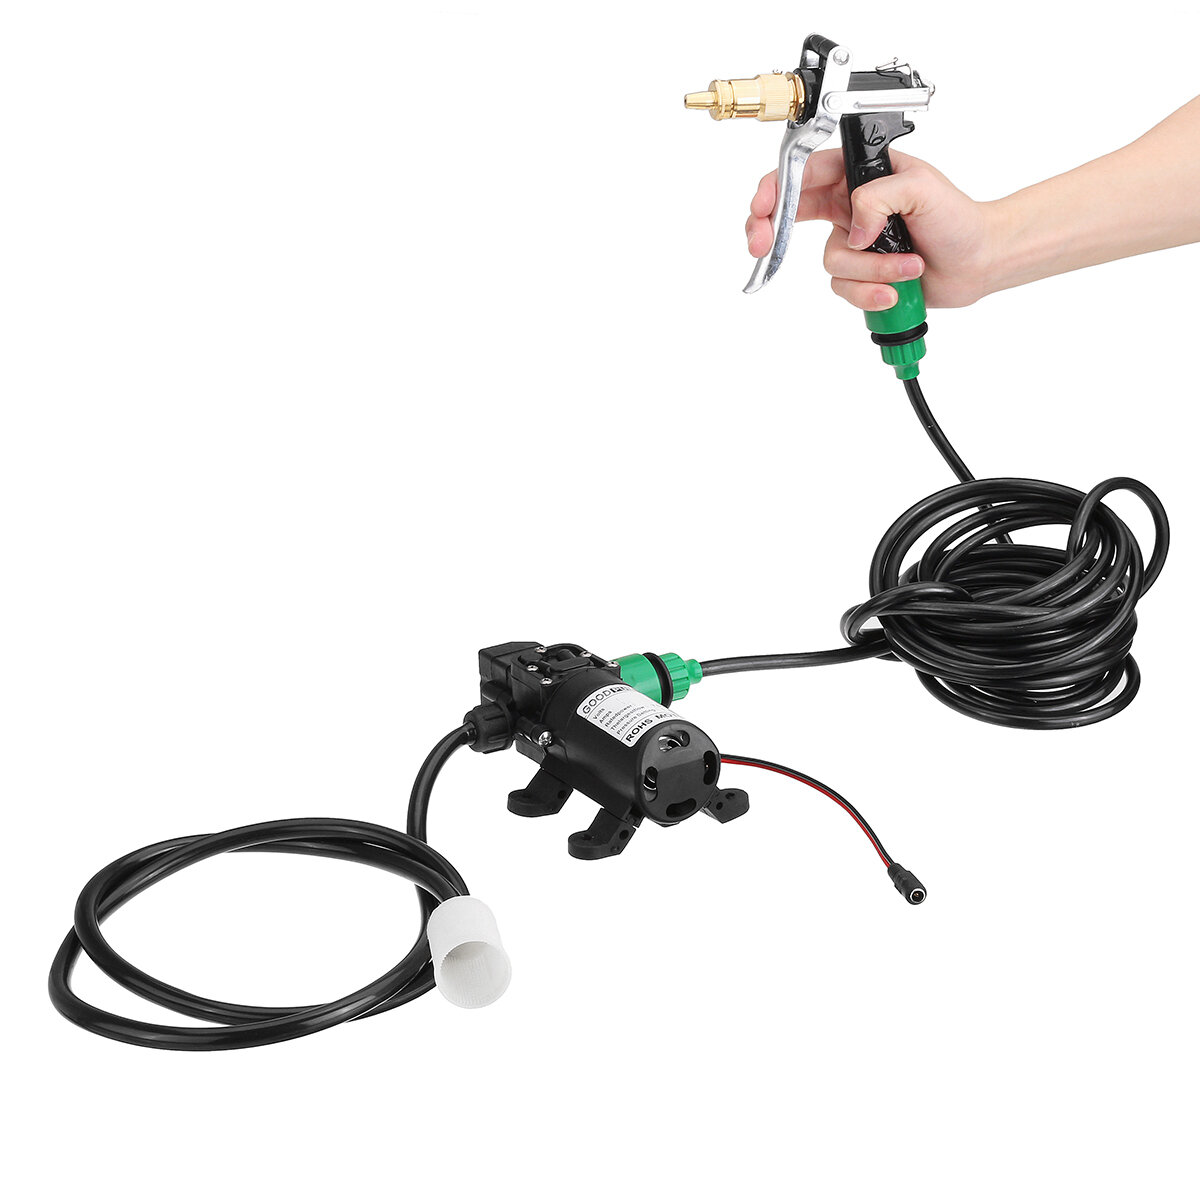 

80W 12V High Pressure Car Electric Washer Squirt Sprayer Wash Self-priming Pump Water Cleaner For Auto Washing Tools